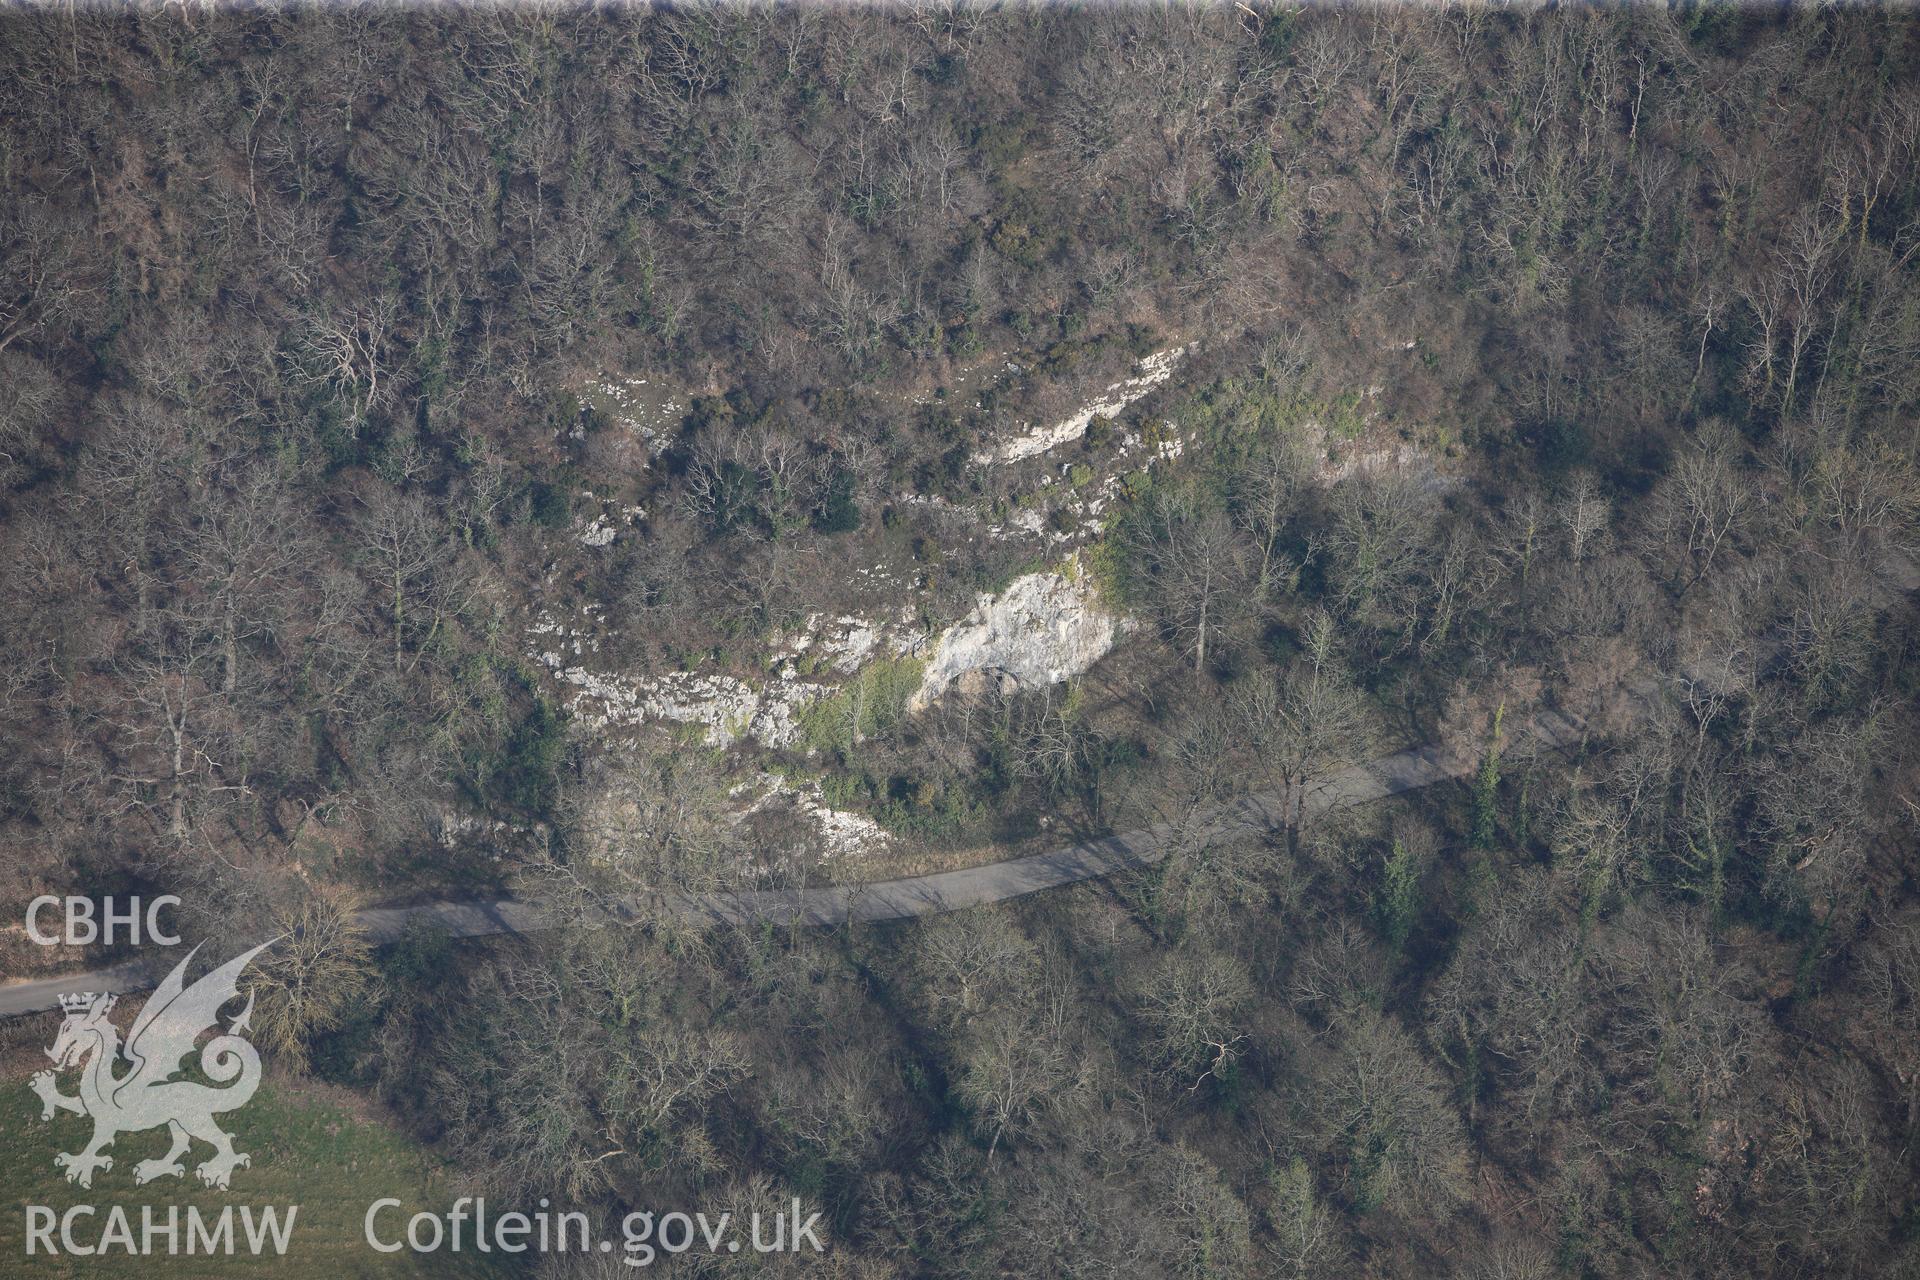 Bont-Newydd cave, Bont-newydd, north west of Denbigh. Oblique aerial photograph taken during the Royal Commission?s programme of archaeological aerial reconnaissance by Toby Driver on 28th February 2013.